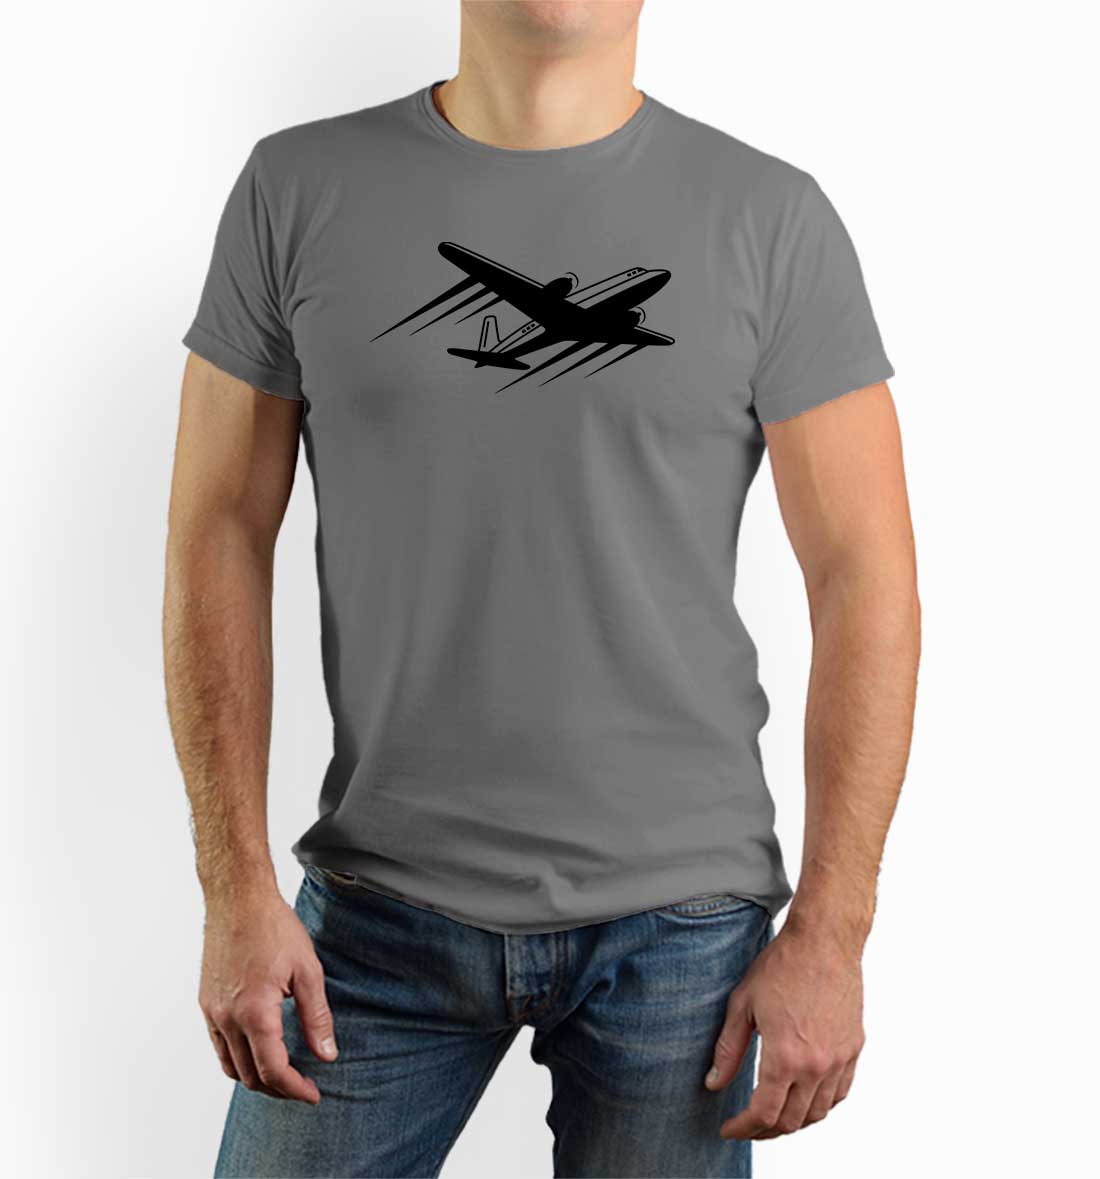 T-shirt with an airplane T-shirt